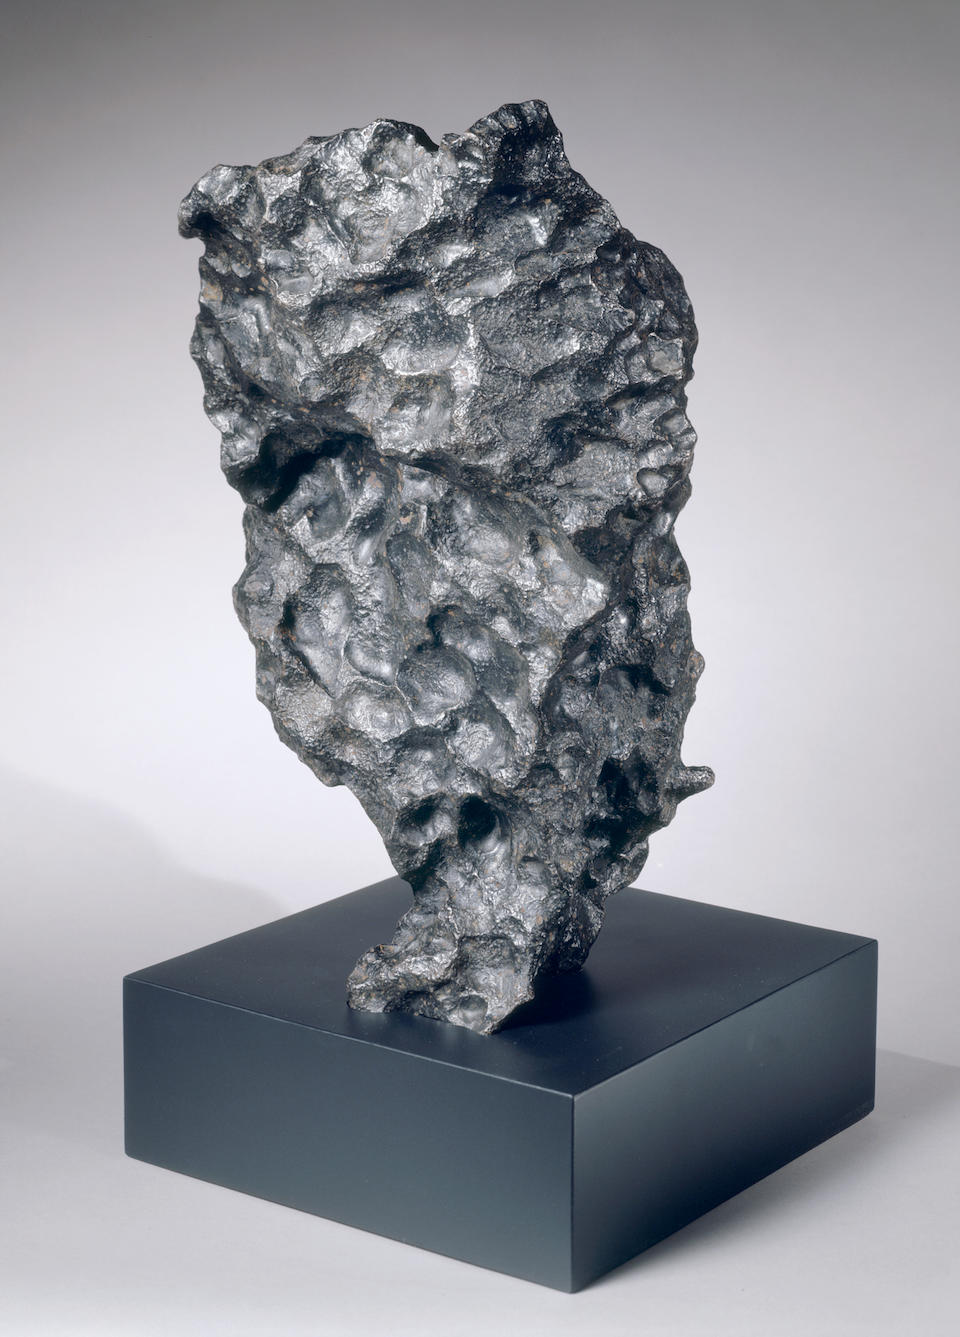 Campo Del Cielo Meteorite &#8212; Sculptural Large Iron Meteorite  from the &#8220;Valley of the Sky&#8221;